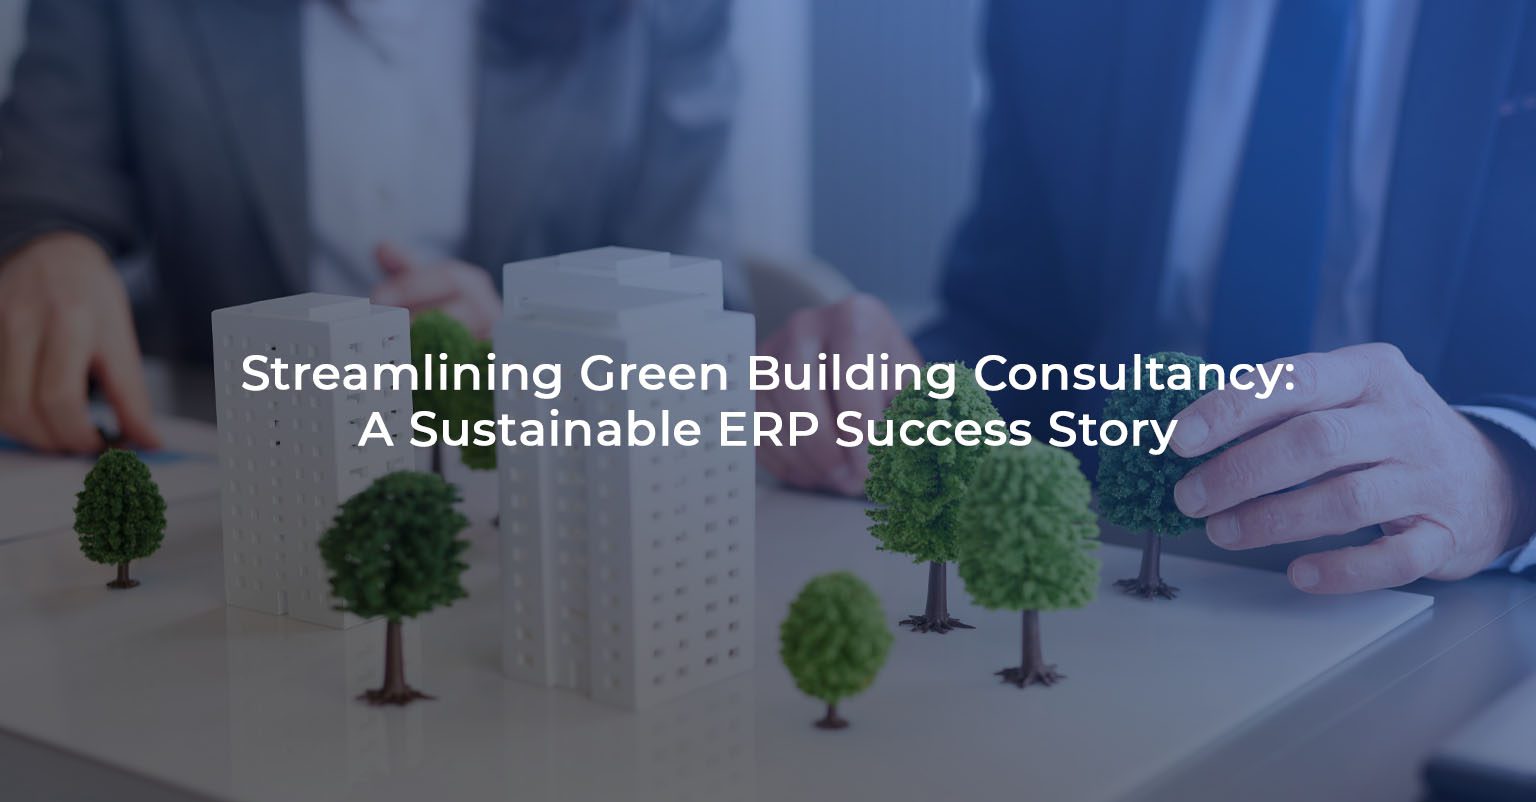 Streamlining Green Building Consultancy: A Sustainable Odoo ERP Success Story